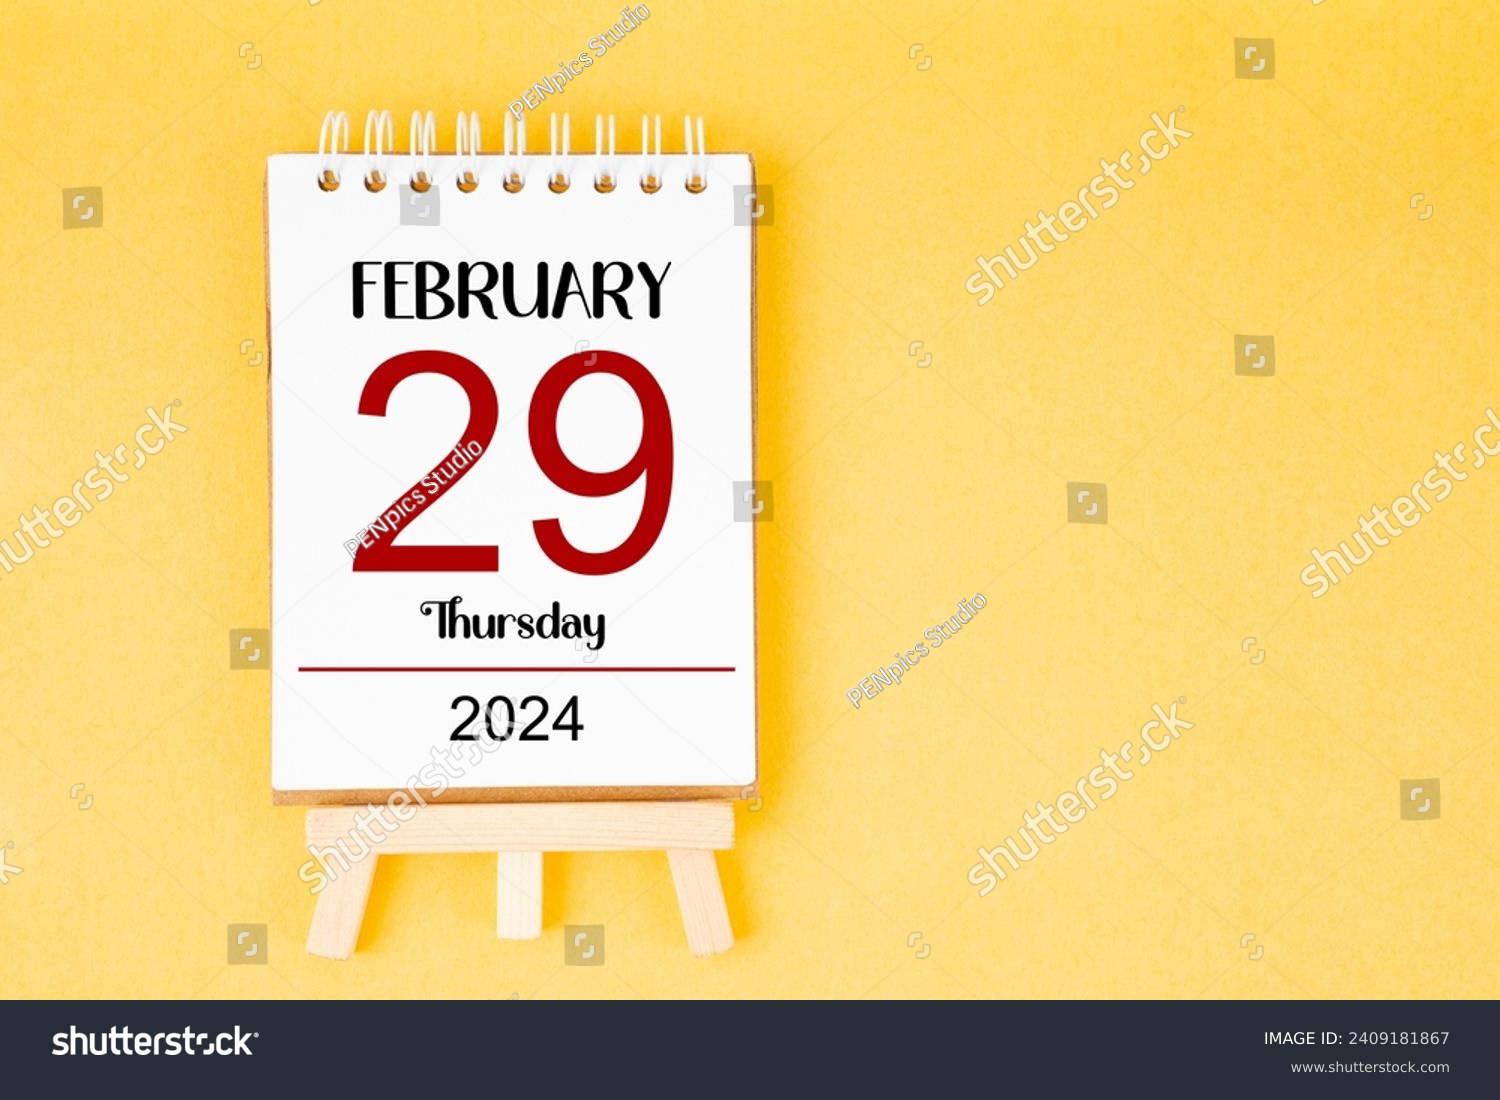 February 29th calendar for February 29 2024 on yellow background. Leap year, intercalary day, bissextile. #2409181867